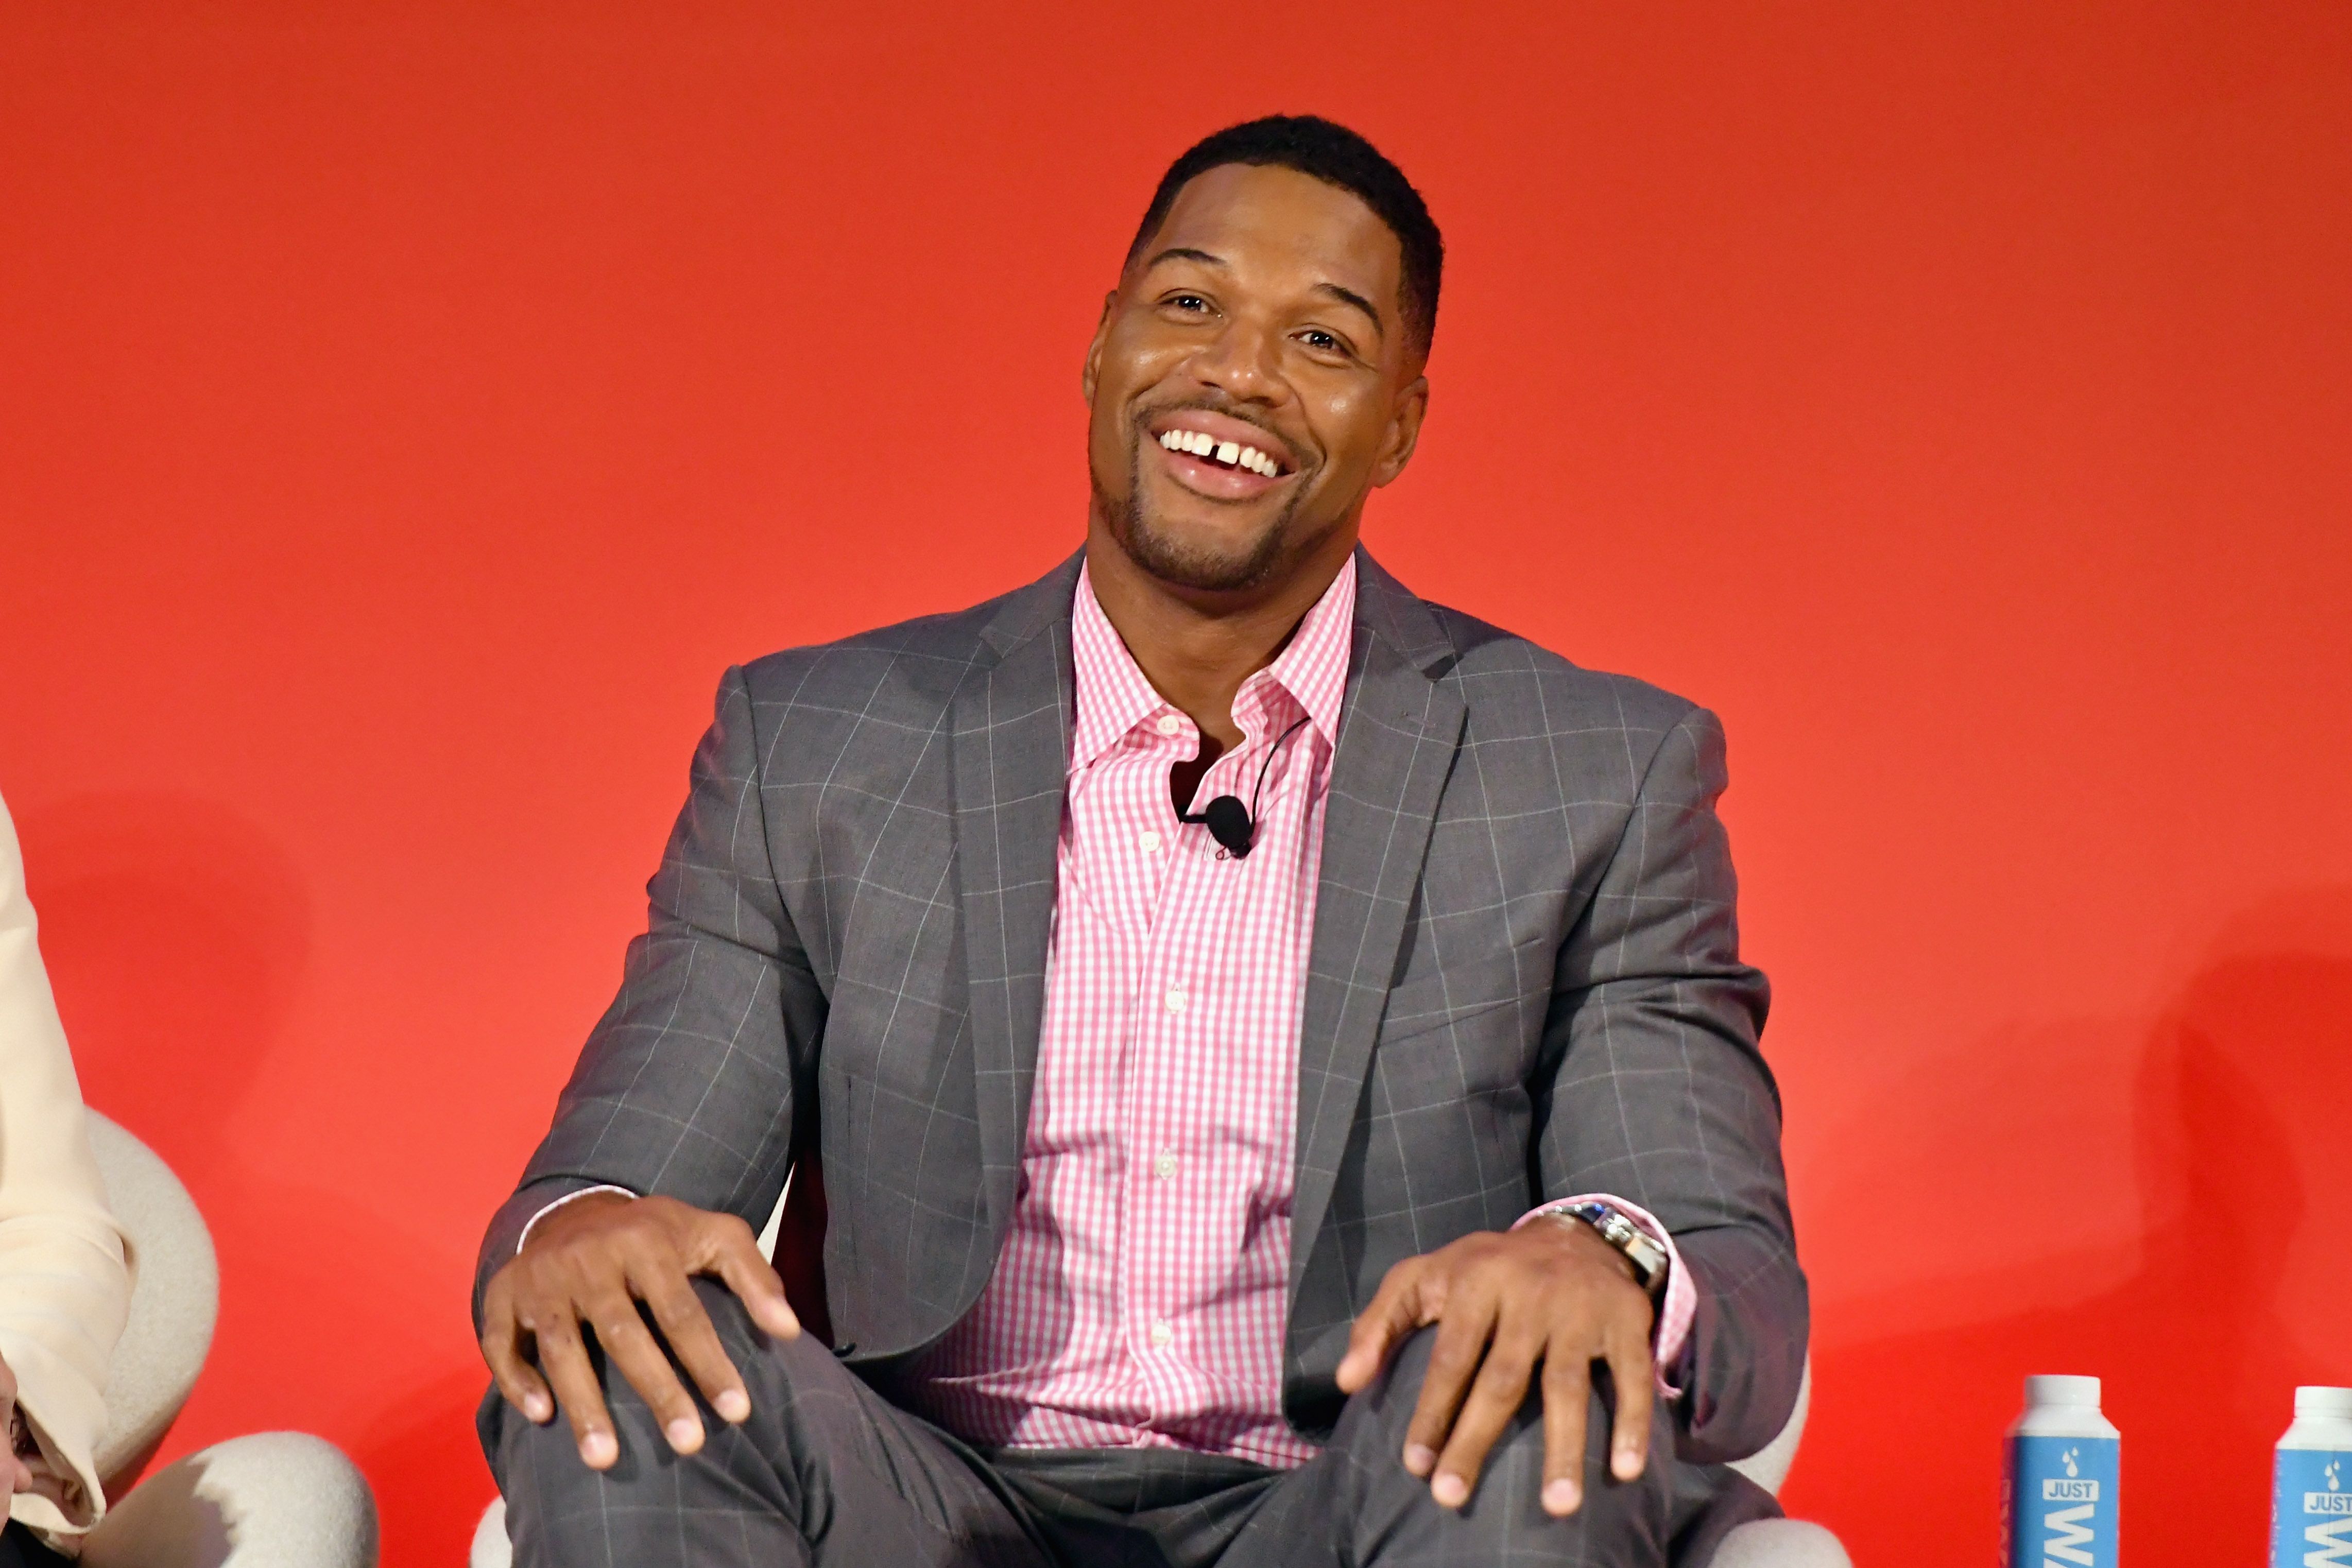 Michael Strahan speaks onstage at the Fox NFL Town Hall panel at The Town Hall during 2016 Advertising Week New York on September 28, 2016 in New York City. | Photo: Getty Images